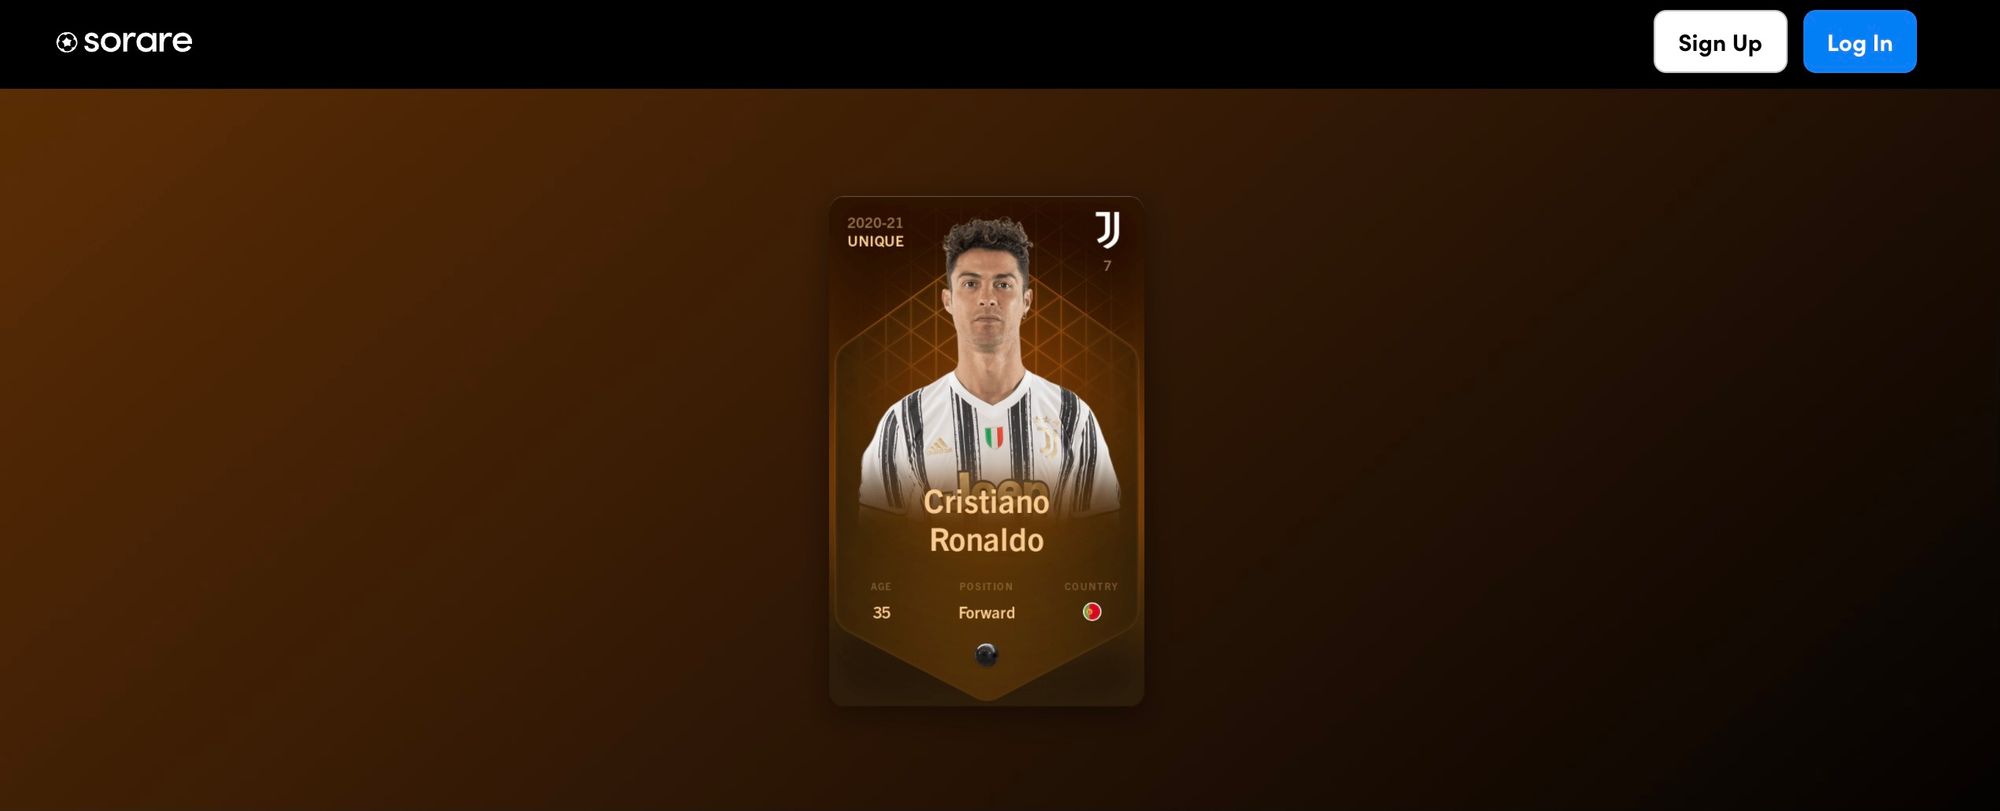 Most expensive trading card ever